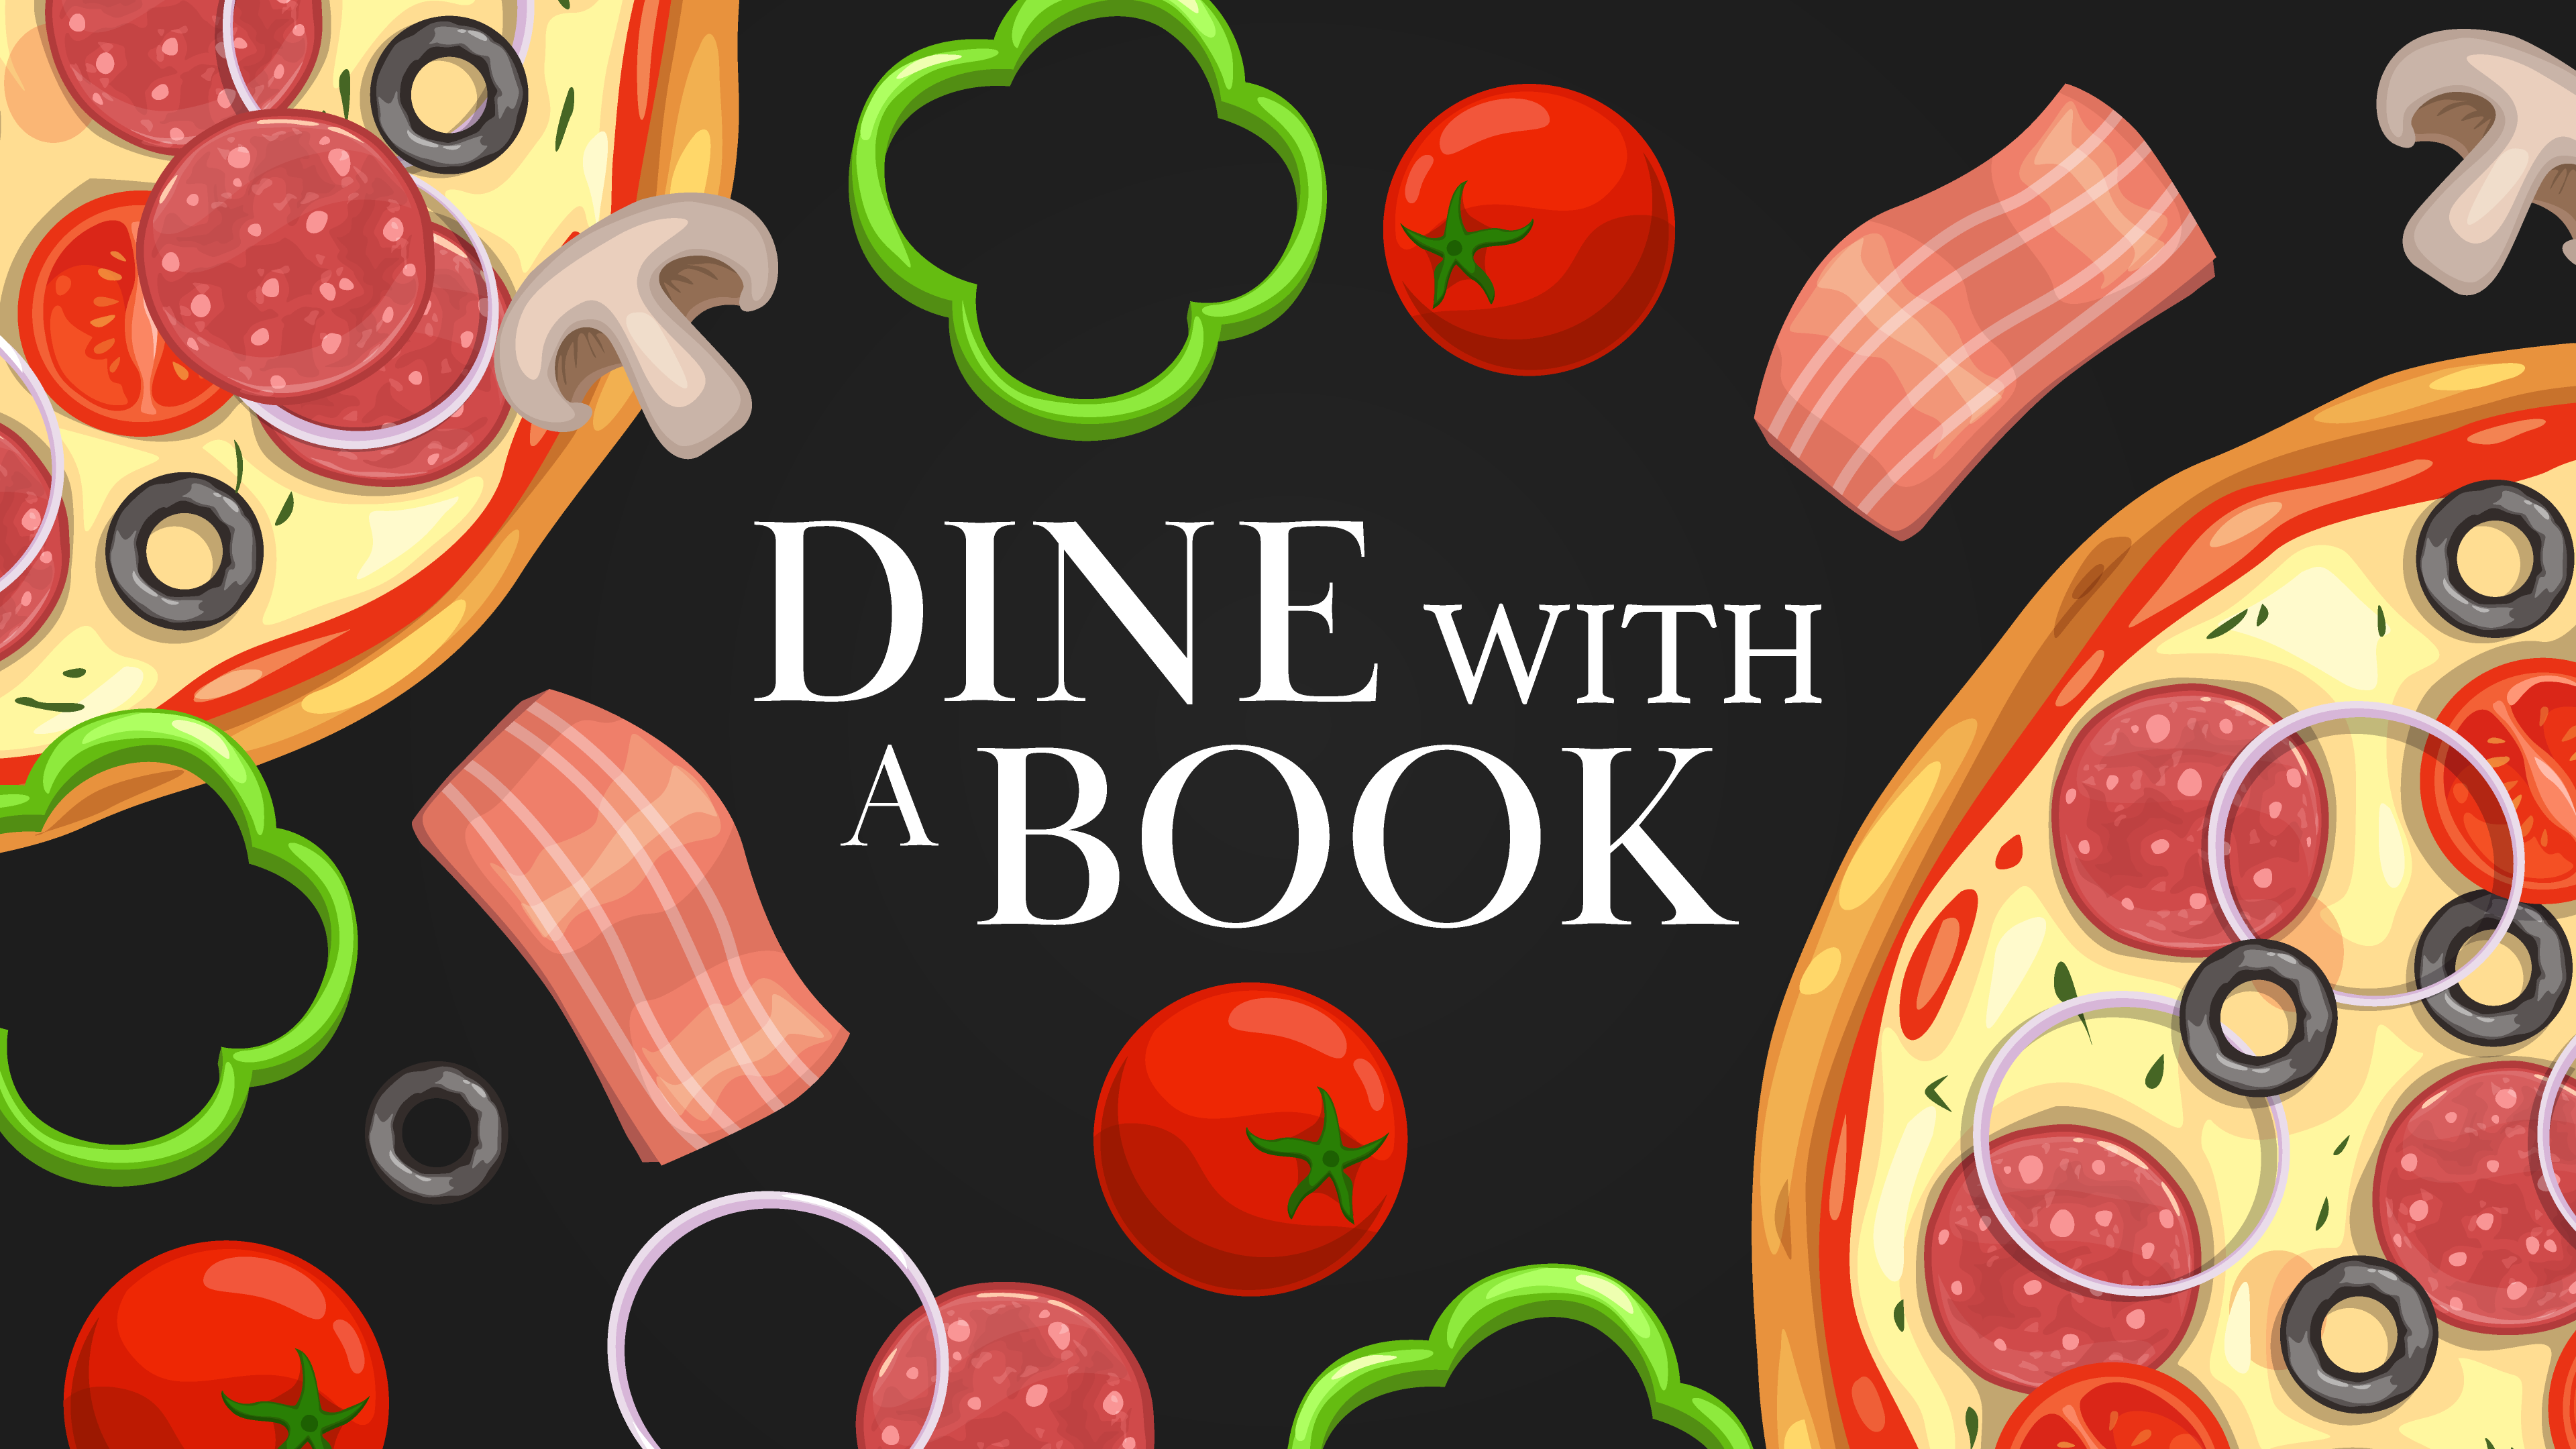 Dine with a Book